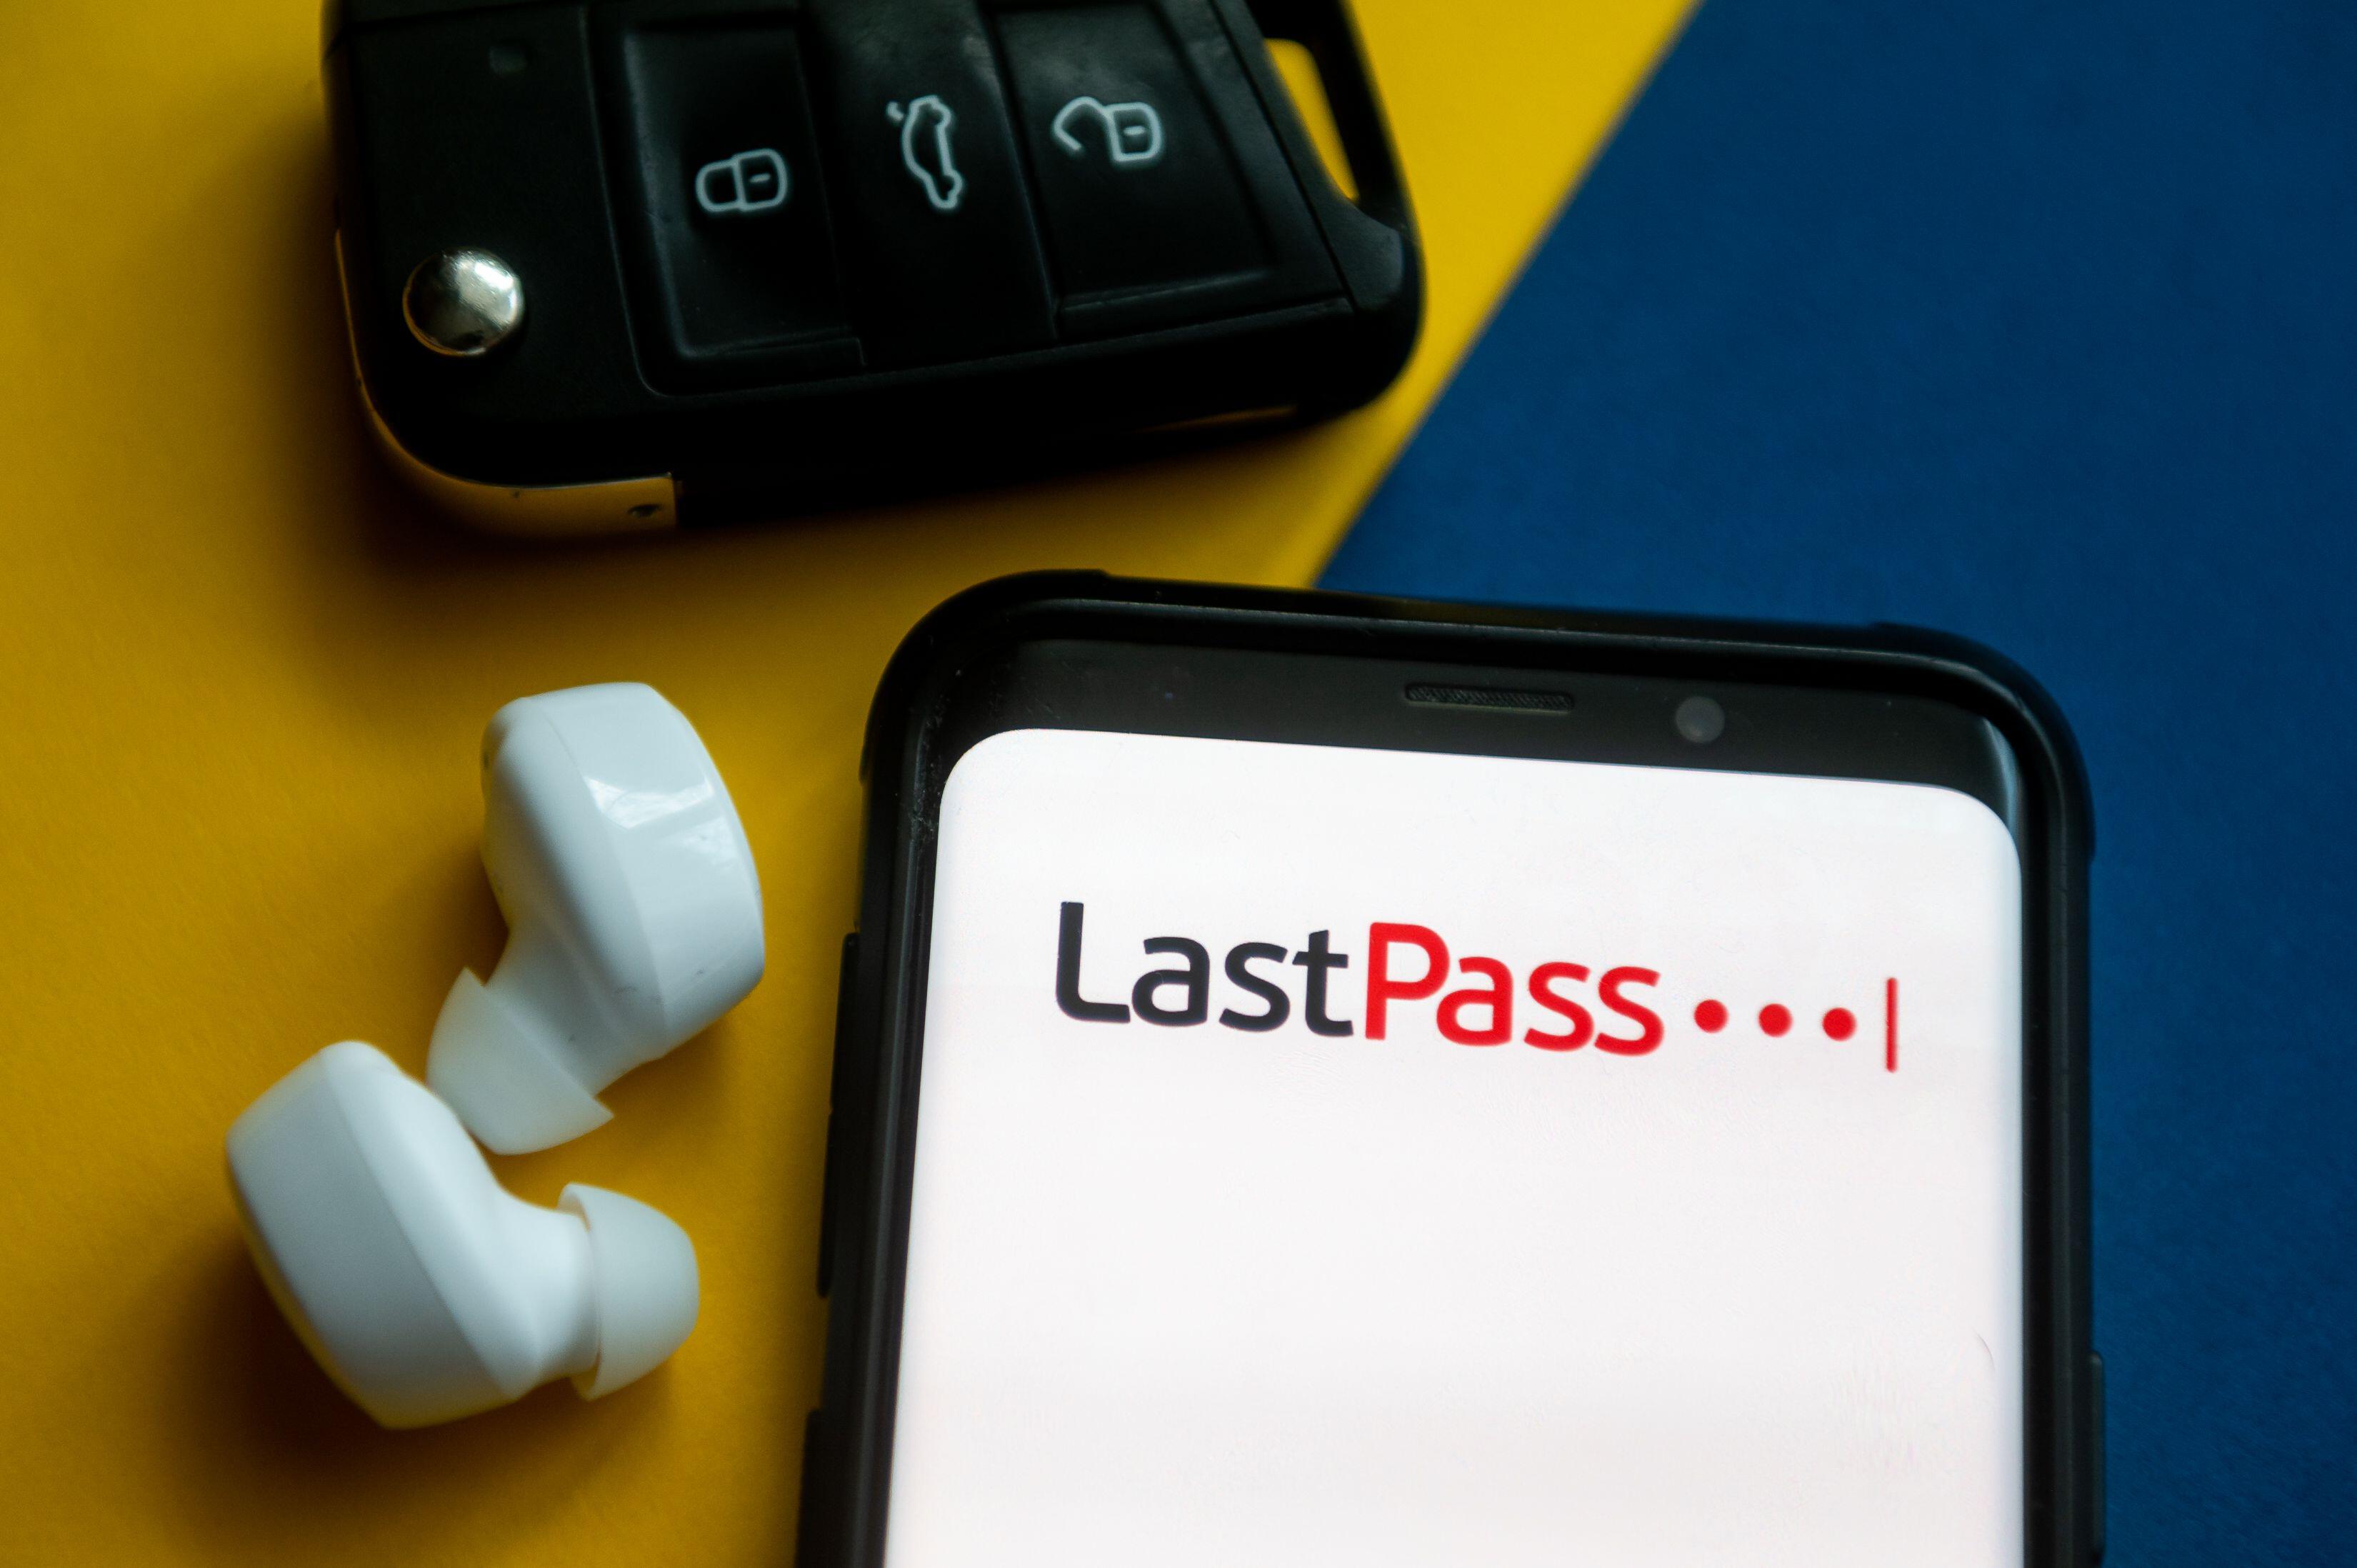 LastPass Hikes Password Requirements to 12 Characters